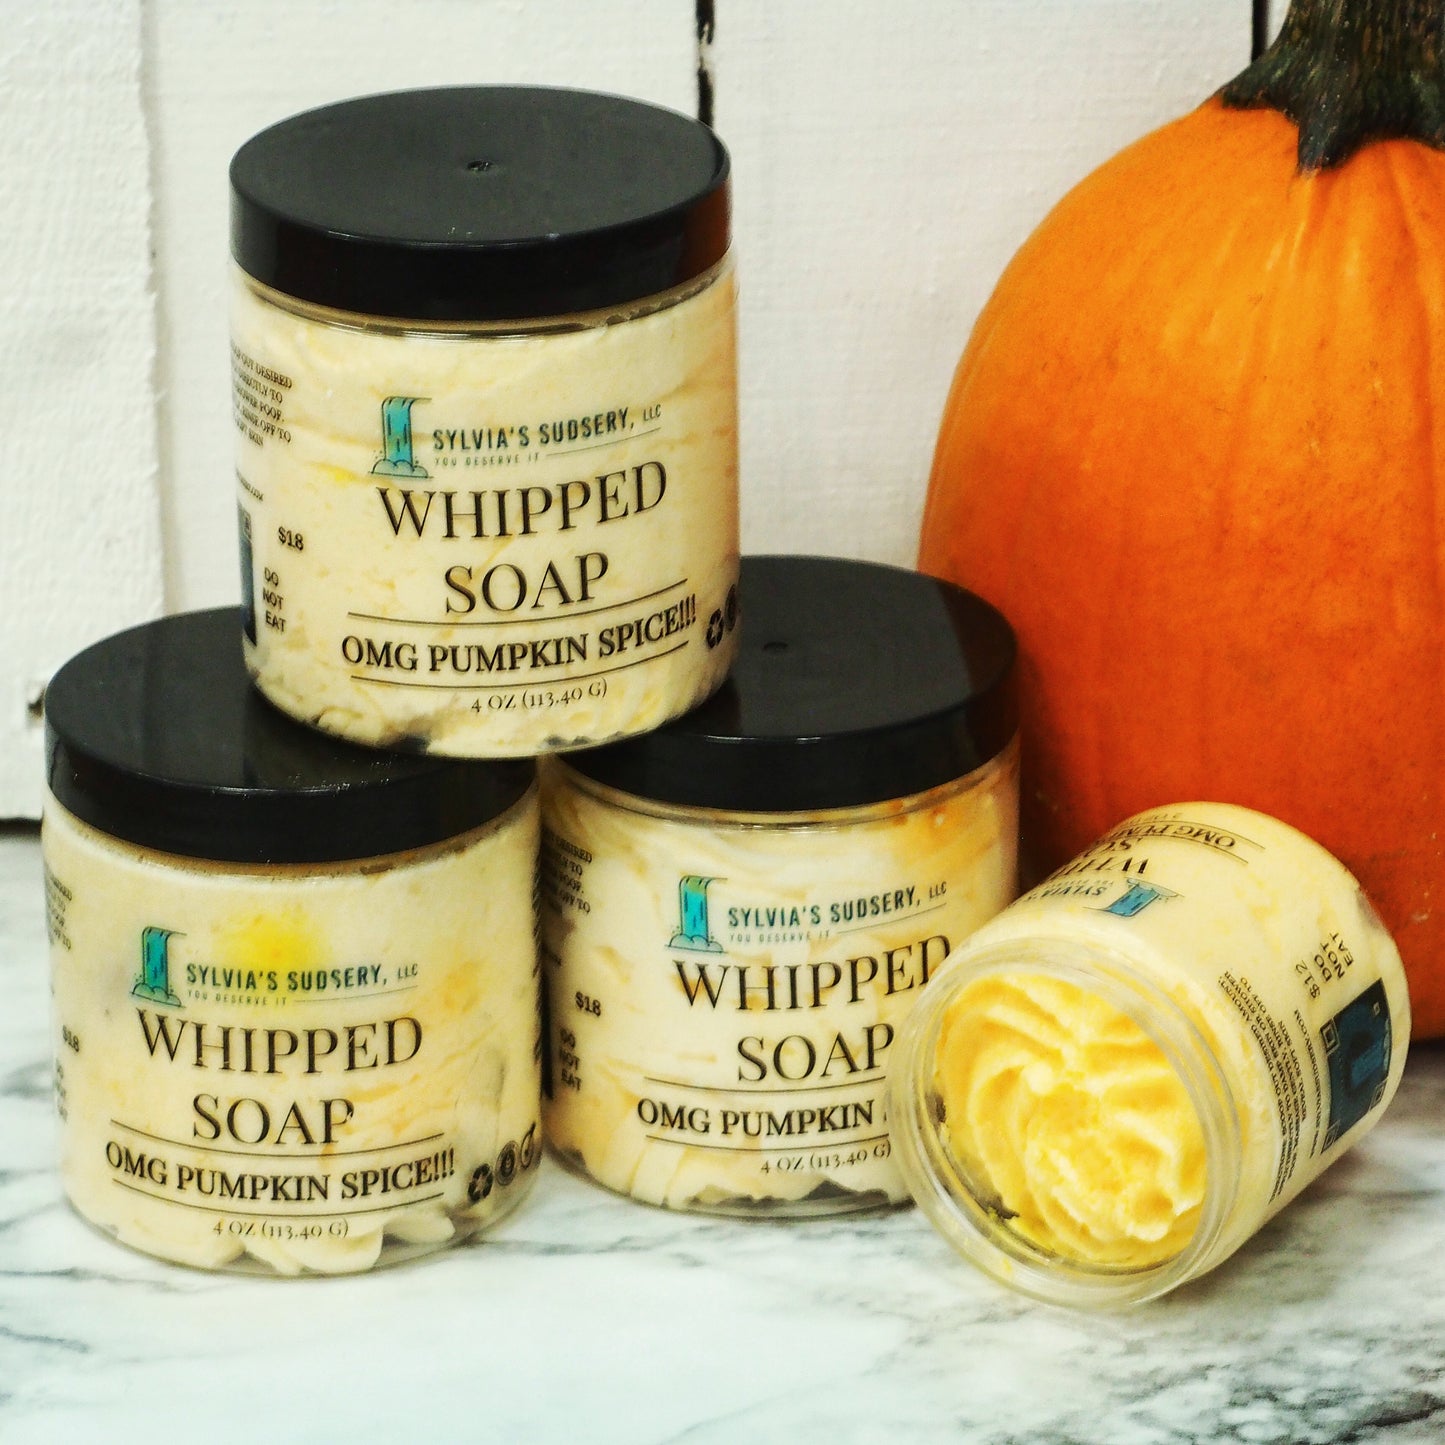 OMG PUMPKIN SPICE!!! WHIPPED SOAP